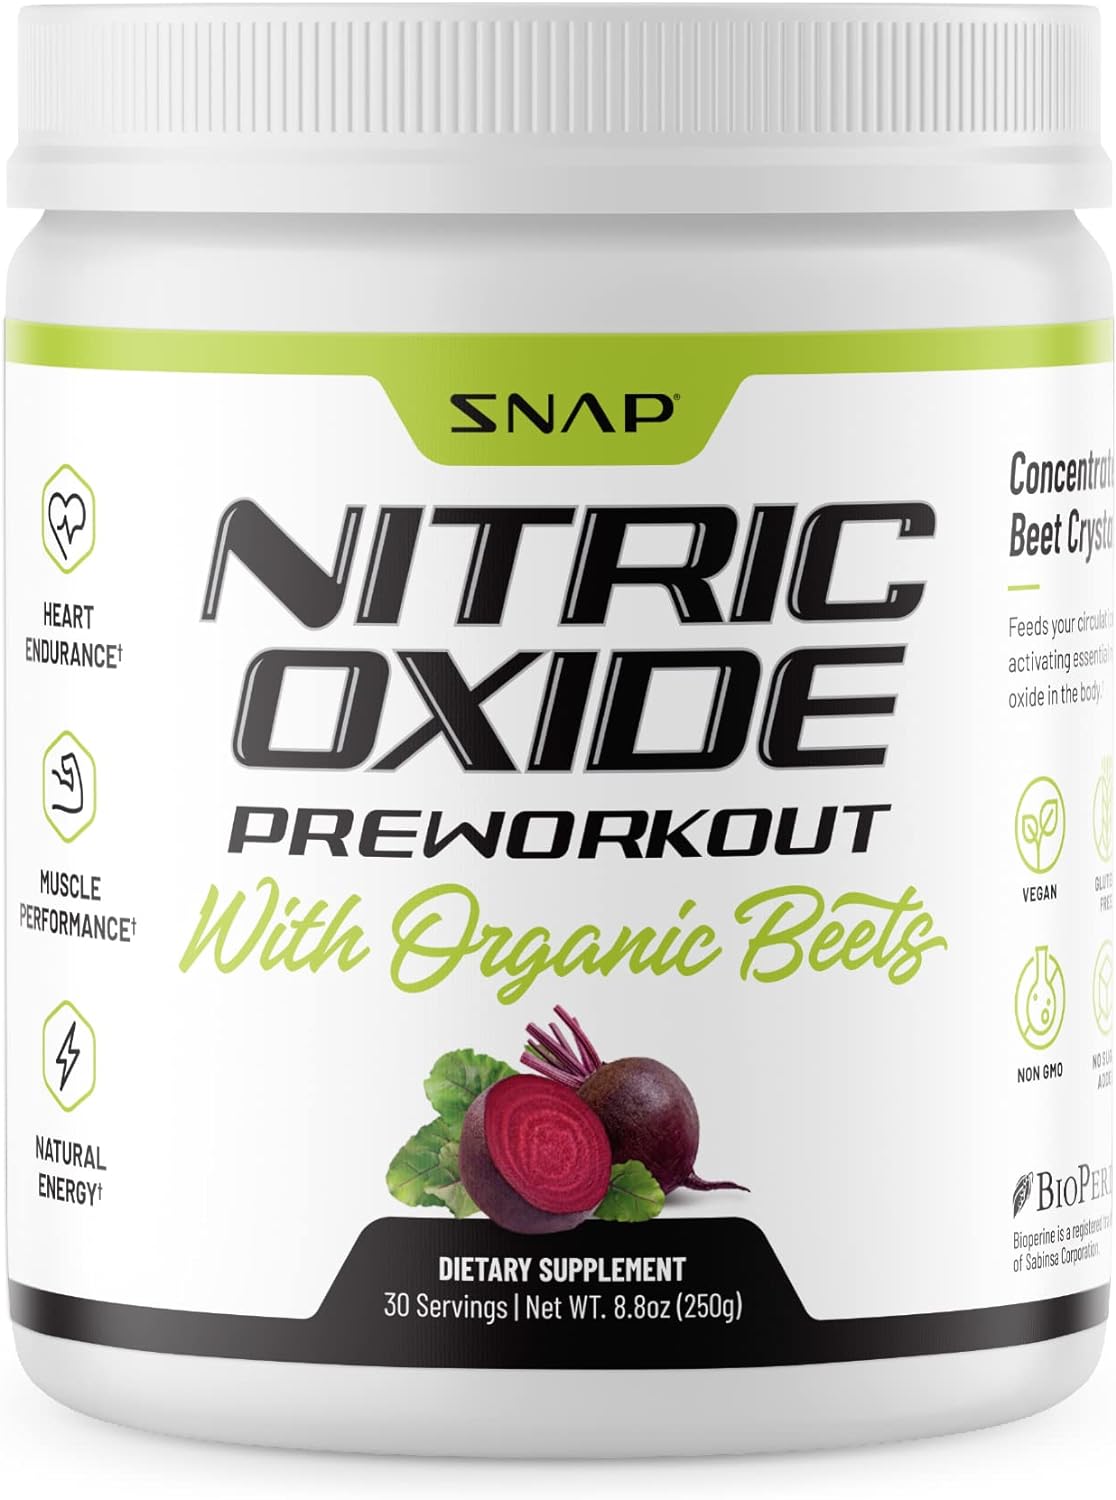 Snap Supplements Preworkout Beet Root Powder, Nitric Oxide Pre Workout with Organic Beets, 250g (30 Servings)